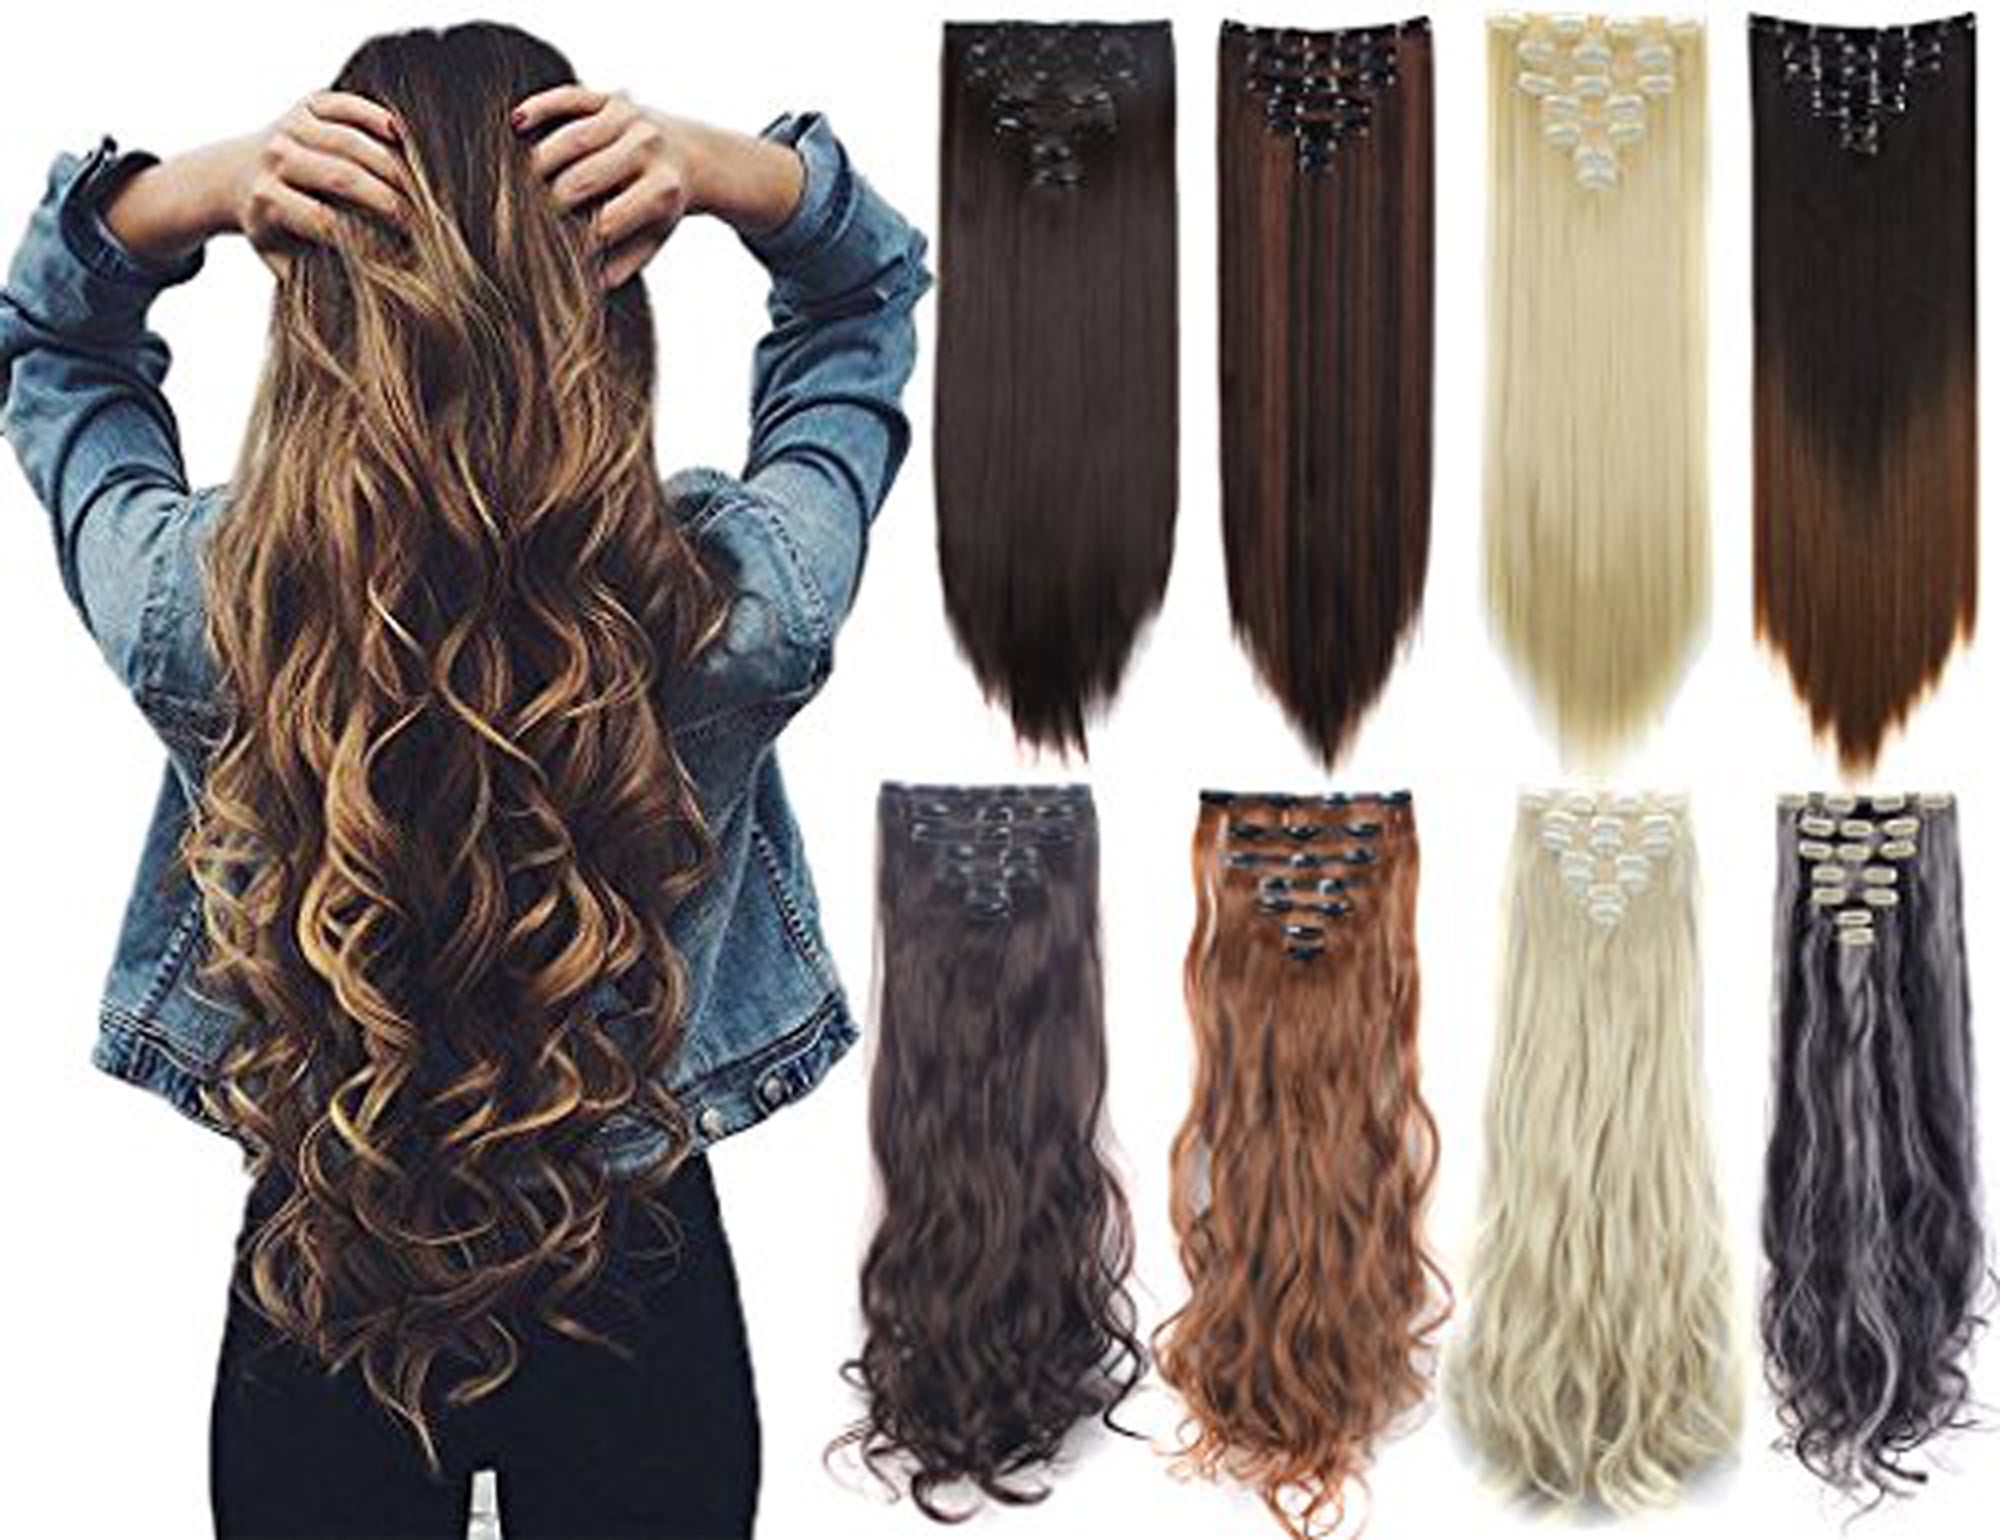 7 piece clip in hair extensions